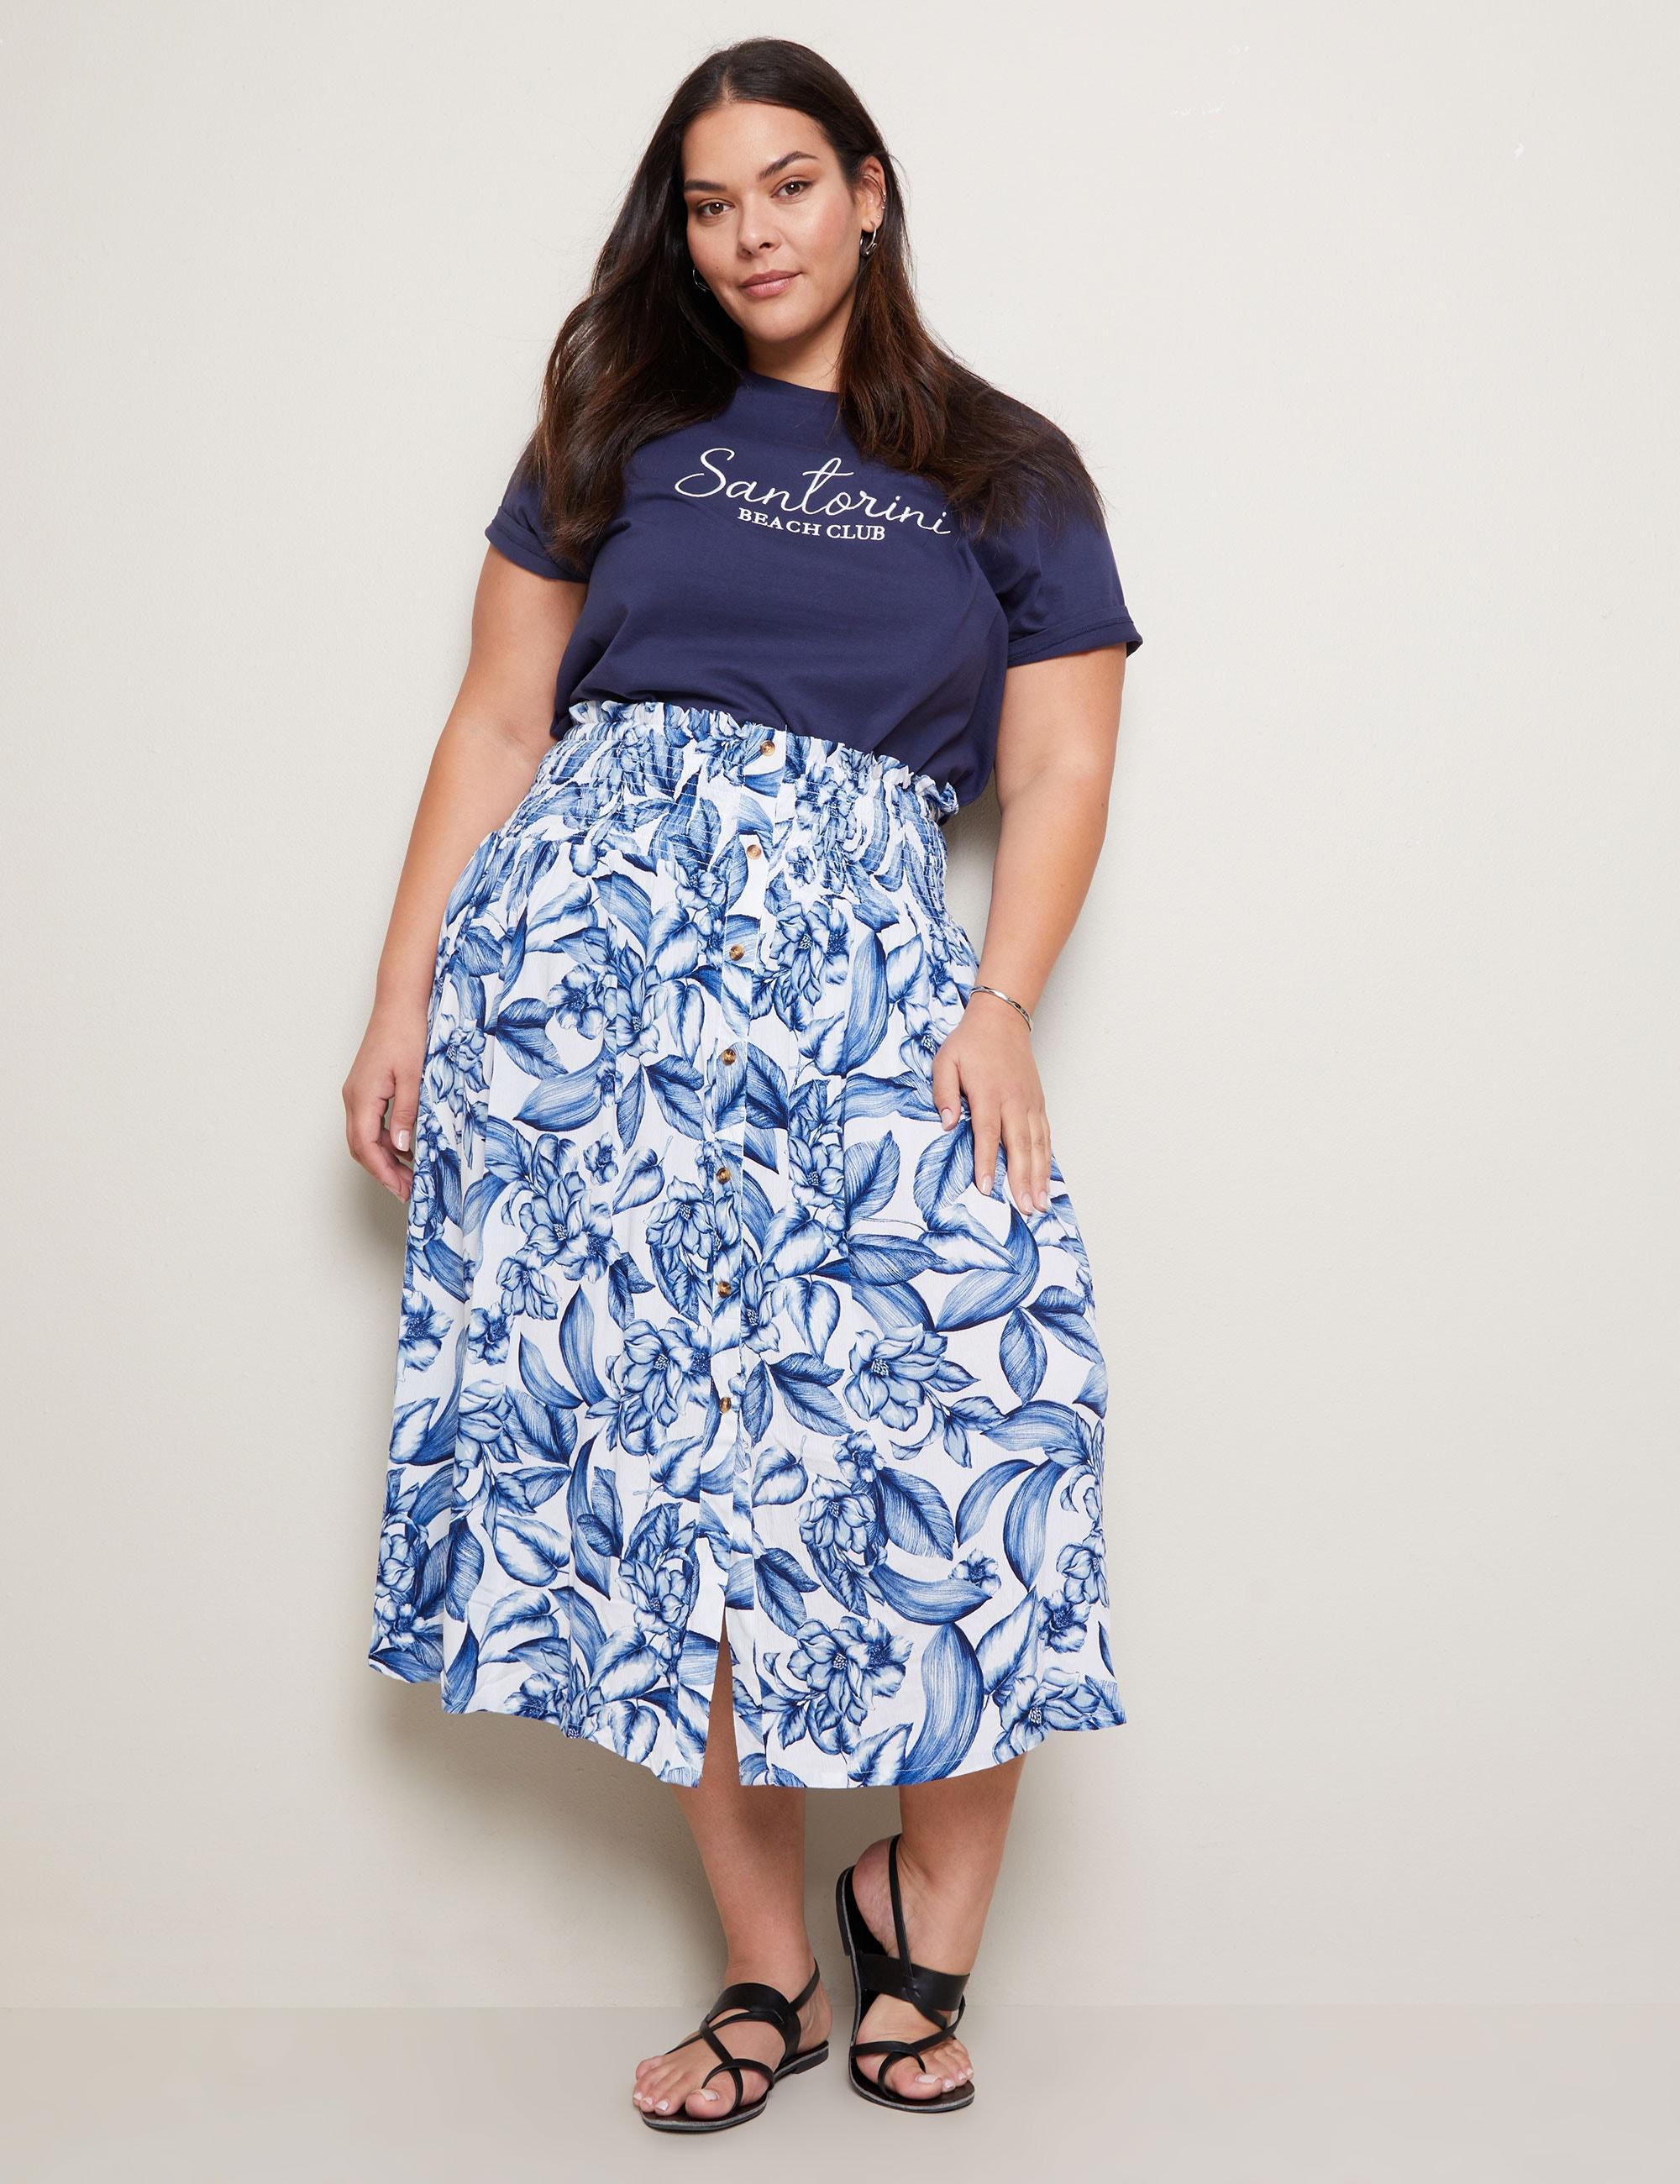 AUTOGRAPH - Plus Size - Womens Skirts - Midi - Summer - Blue - Floral - A Line - Relaxed Fit - Woven - Smocked Waist - Knee Length - Fashion Clothes